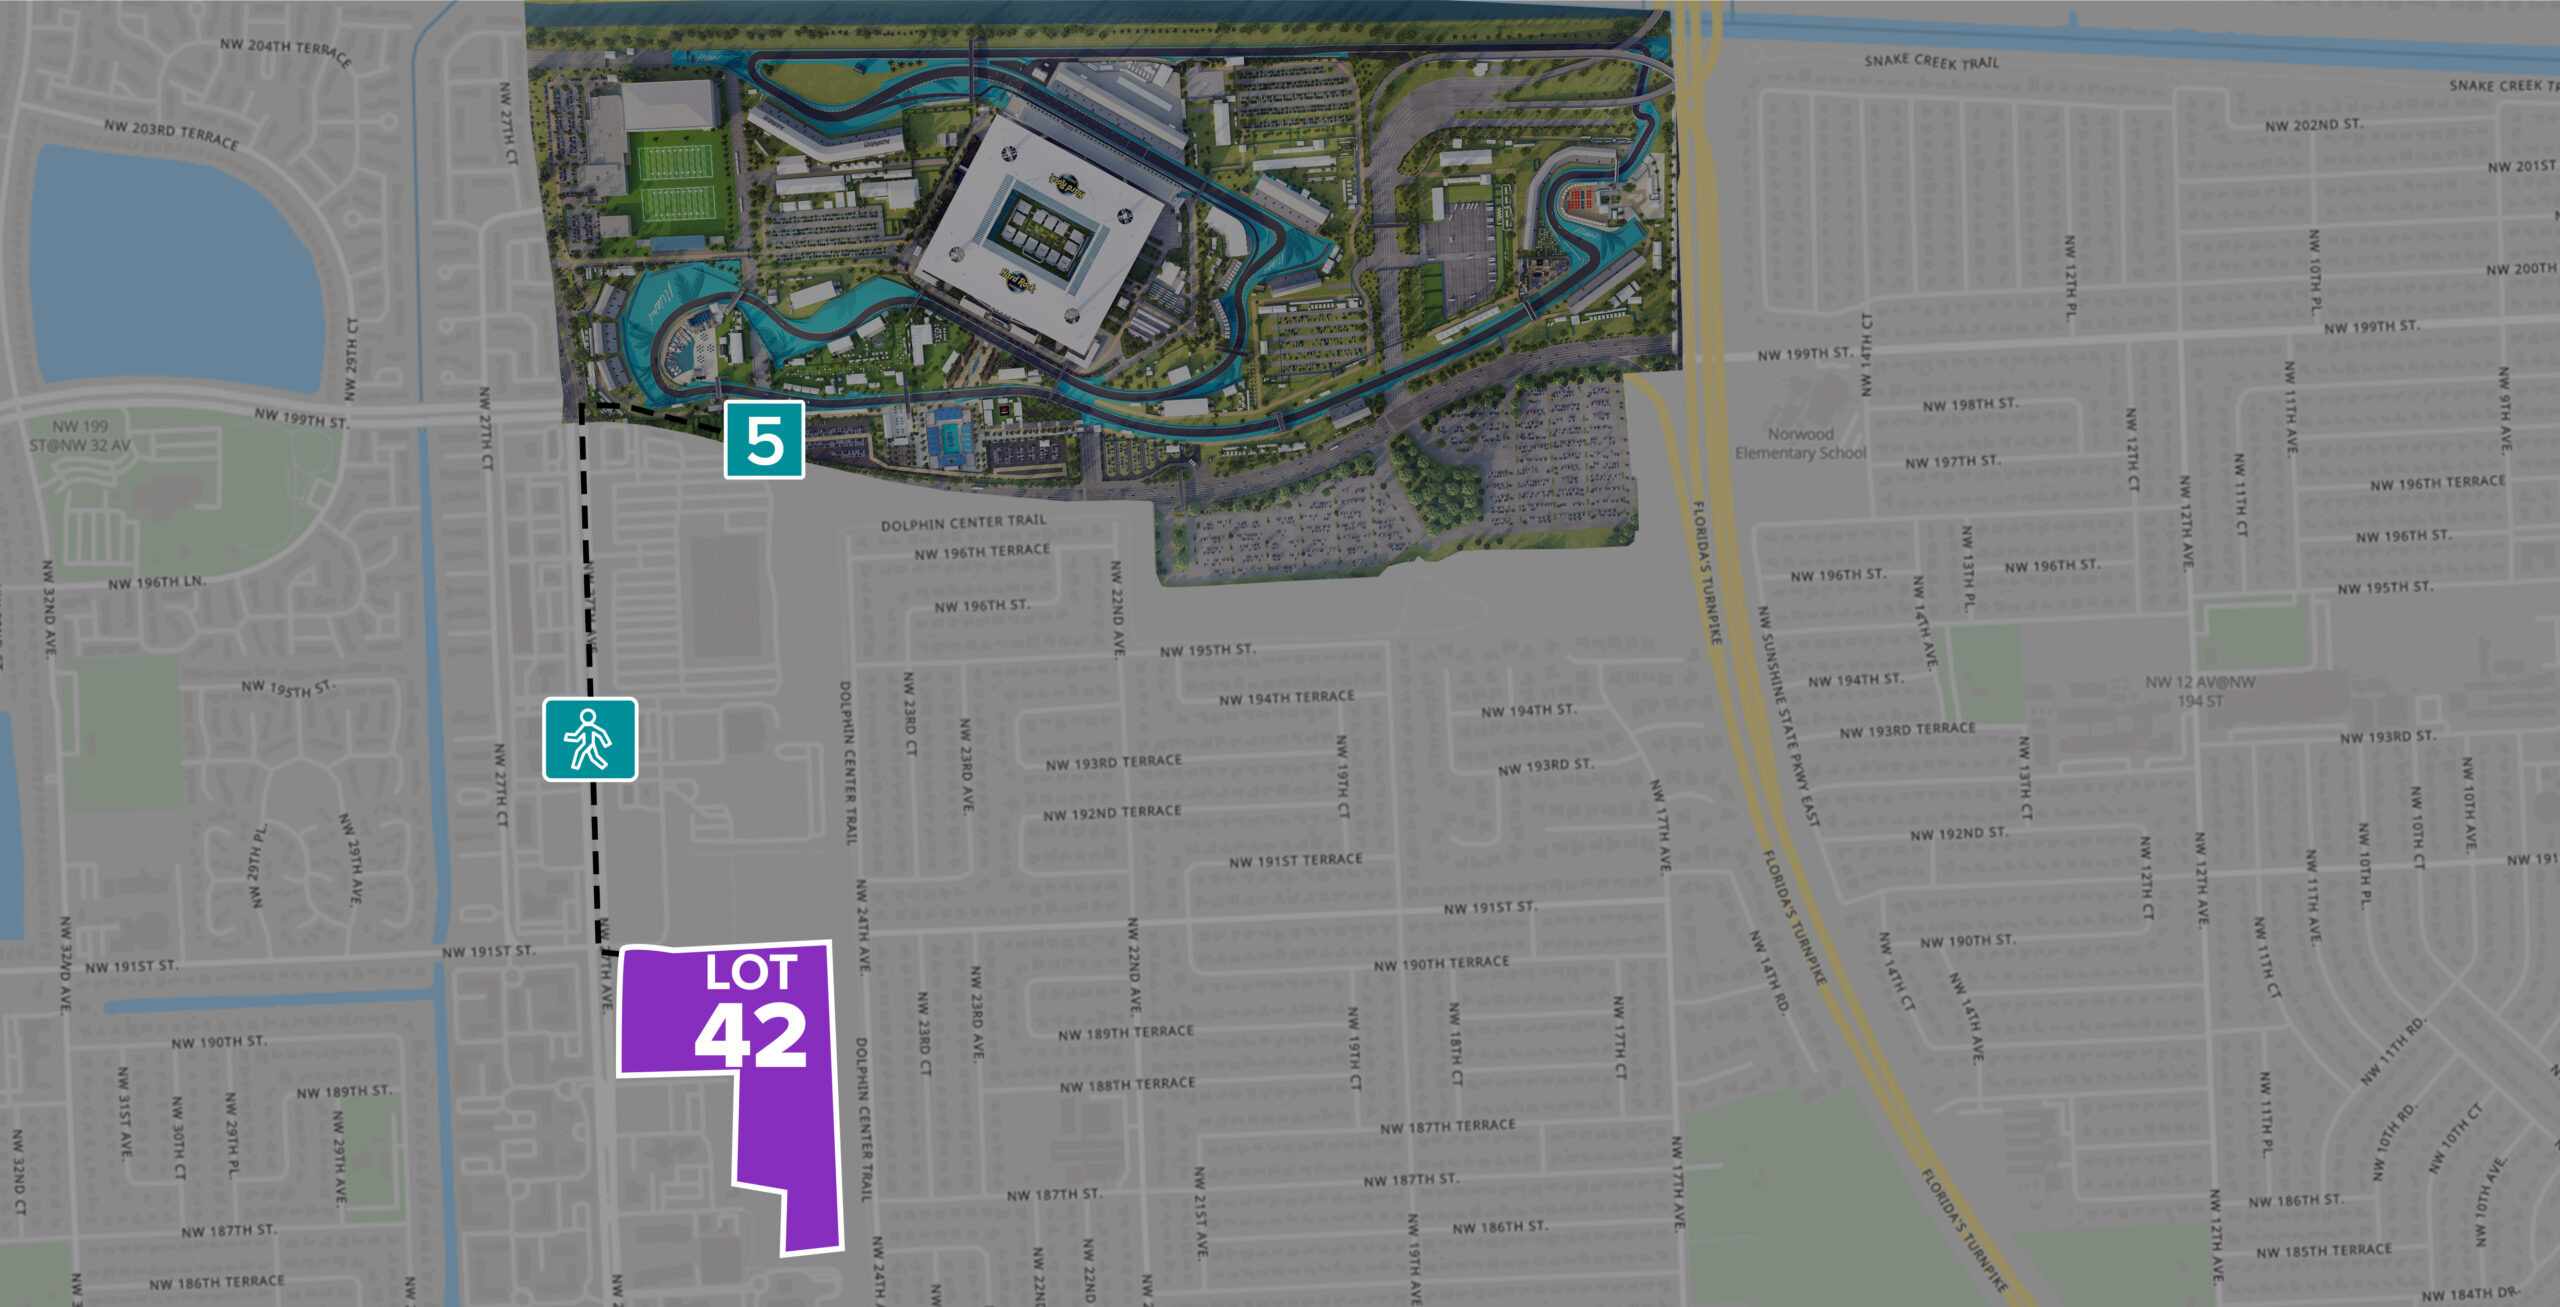 F1 Miami Parking Guide: Official Pass & Unofficial Parking Lots